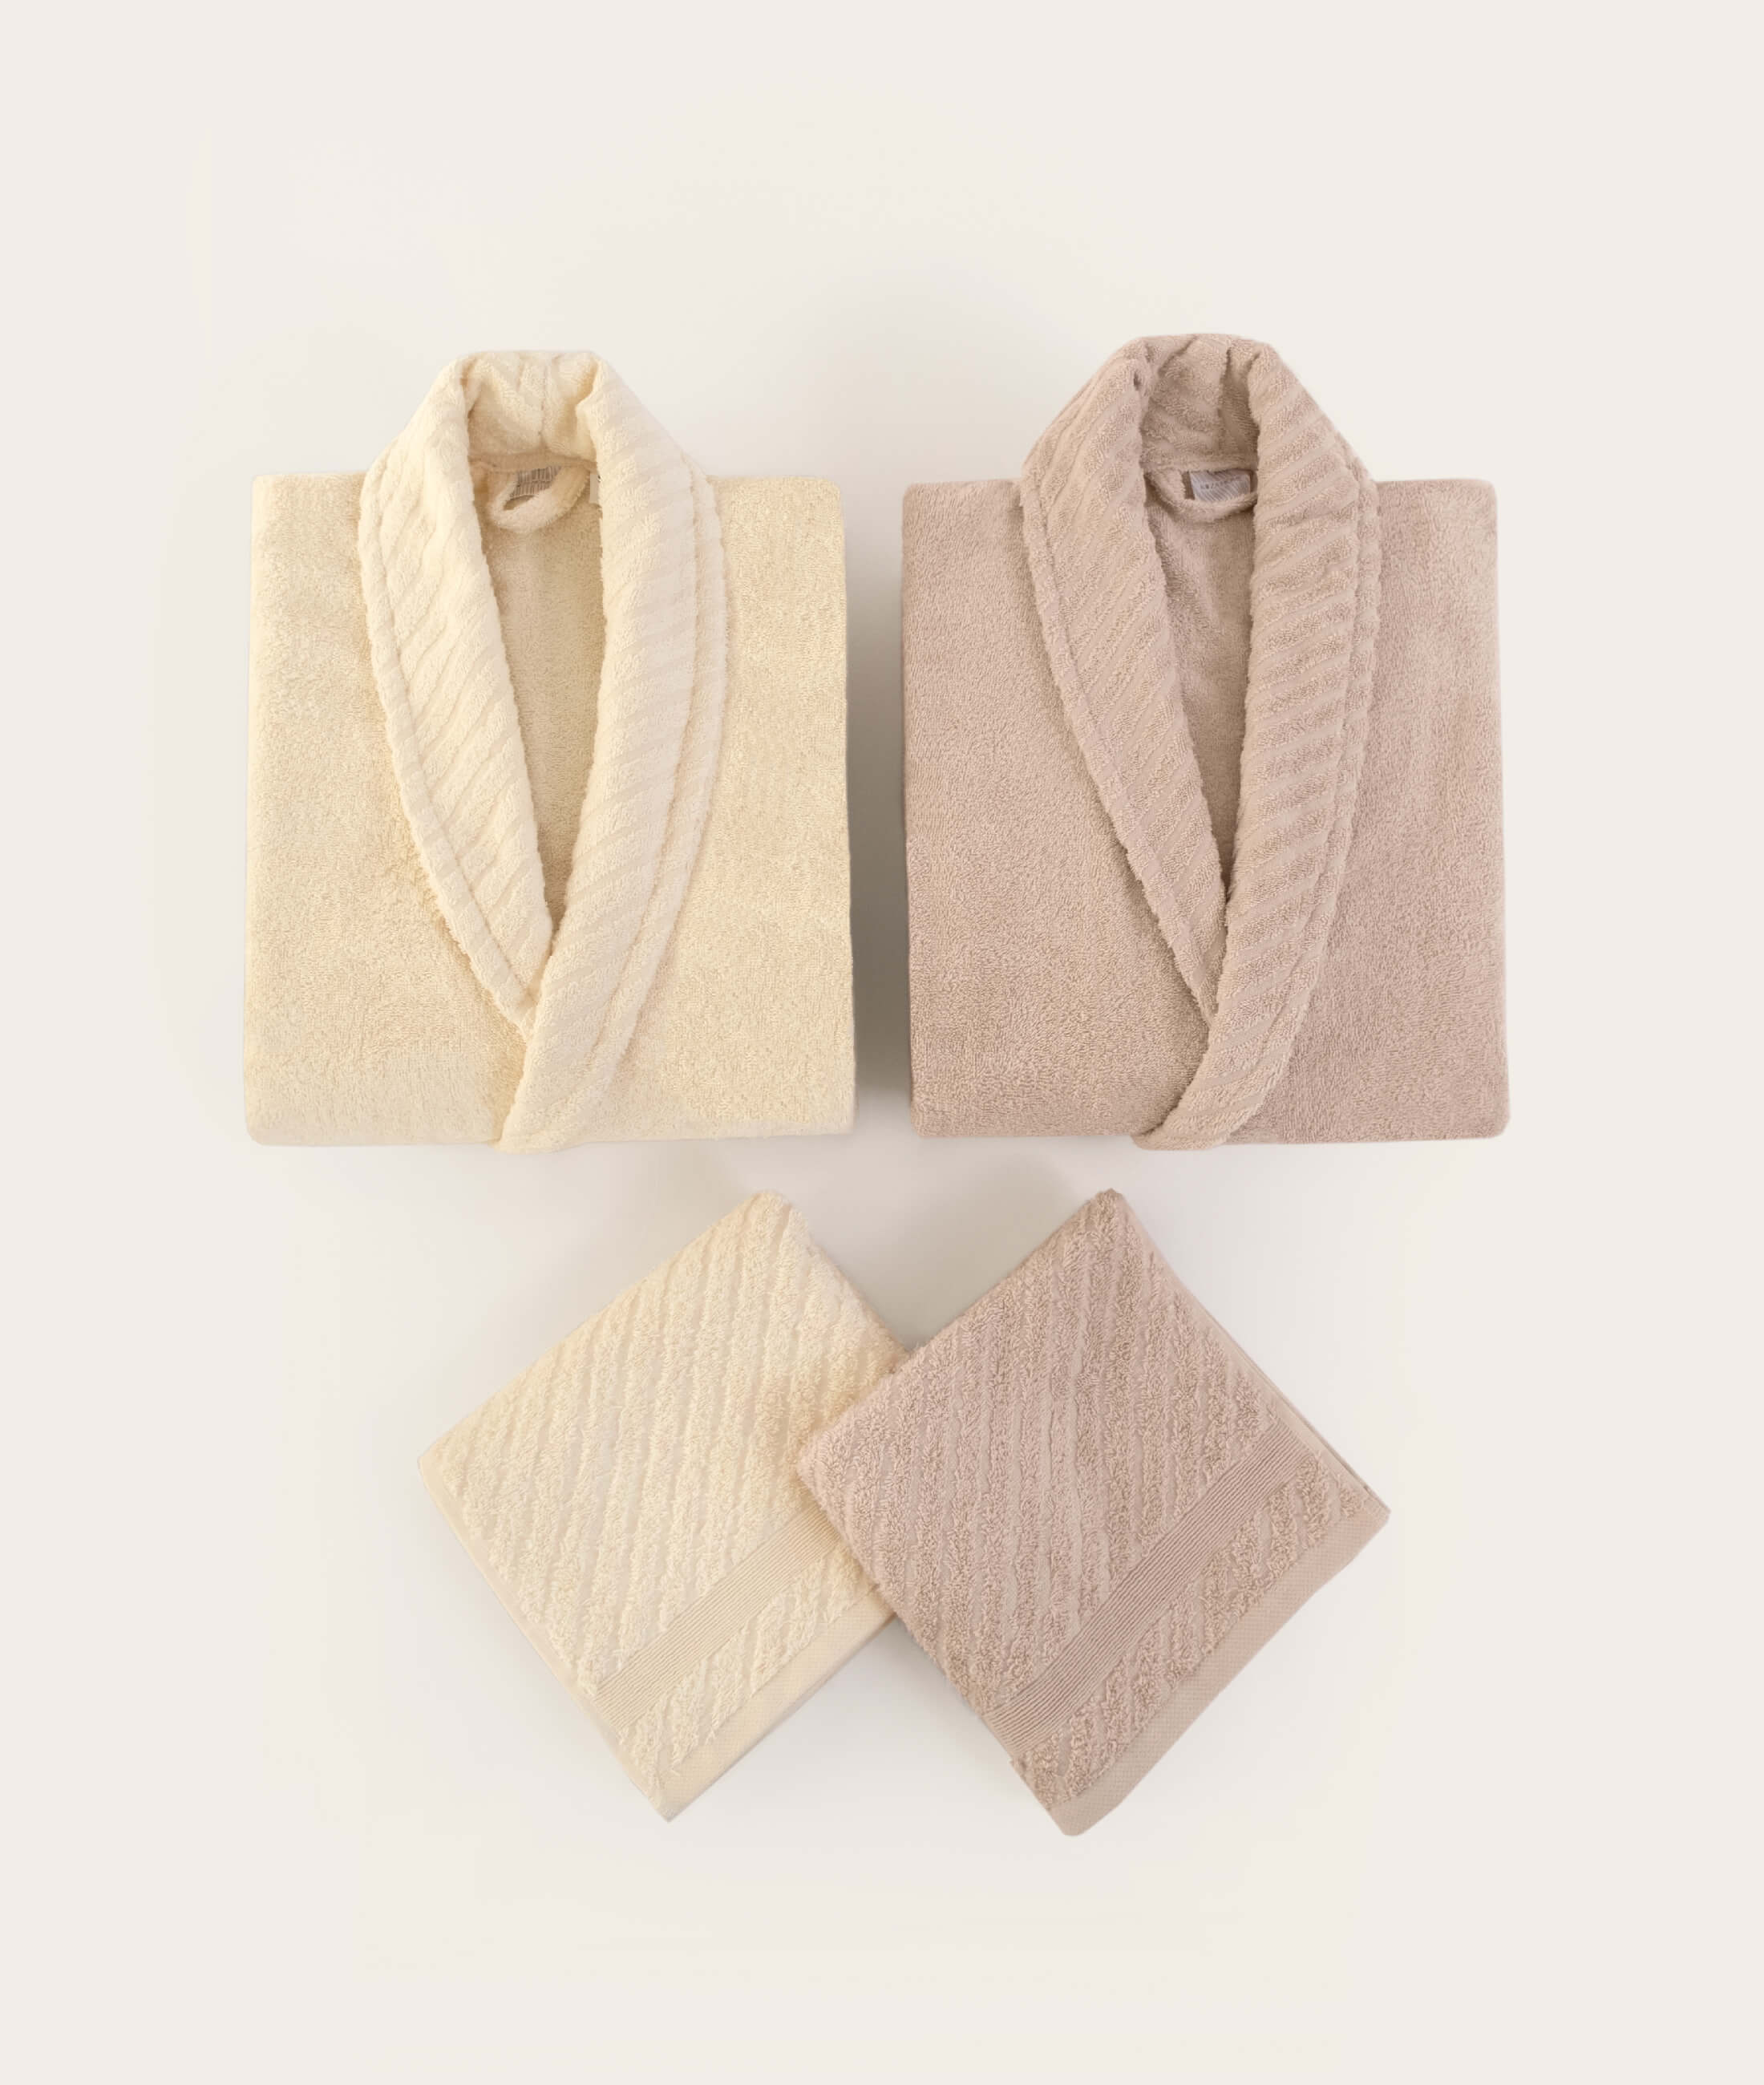 Lycian Salmon-Cream Set of 4 Family Bathrobes and Towels 2 Bathrobes 2 Towels 1062A